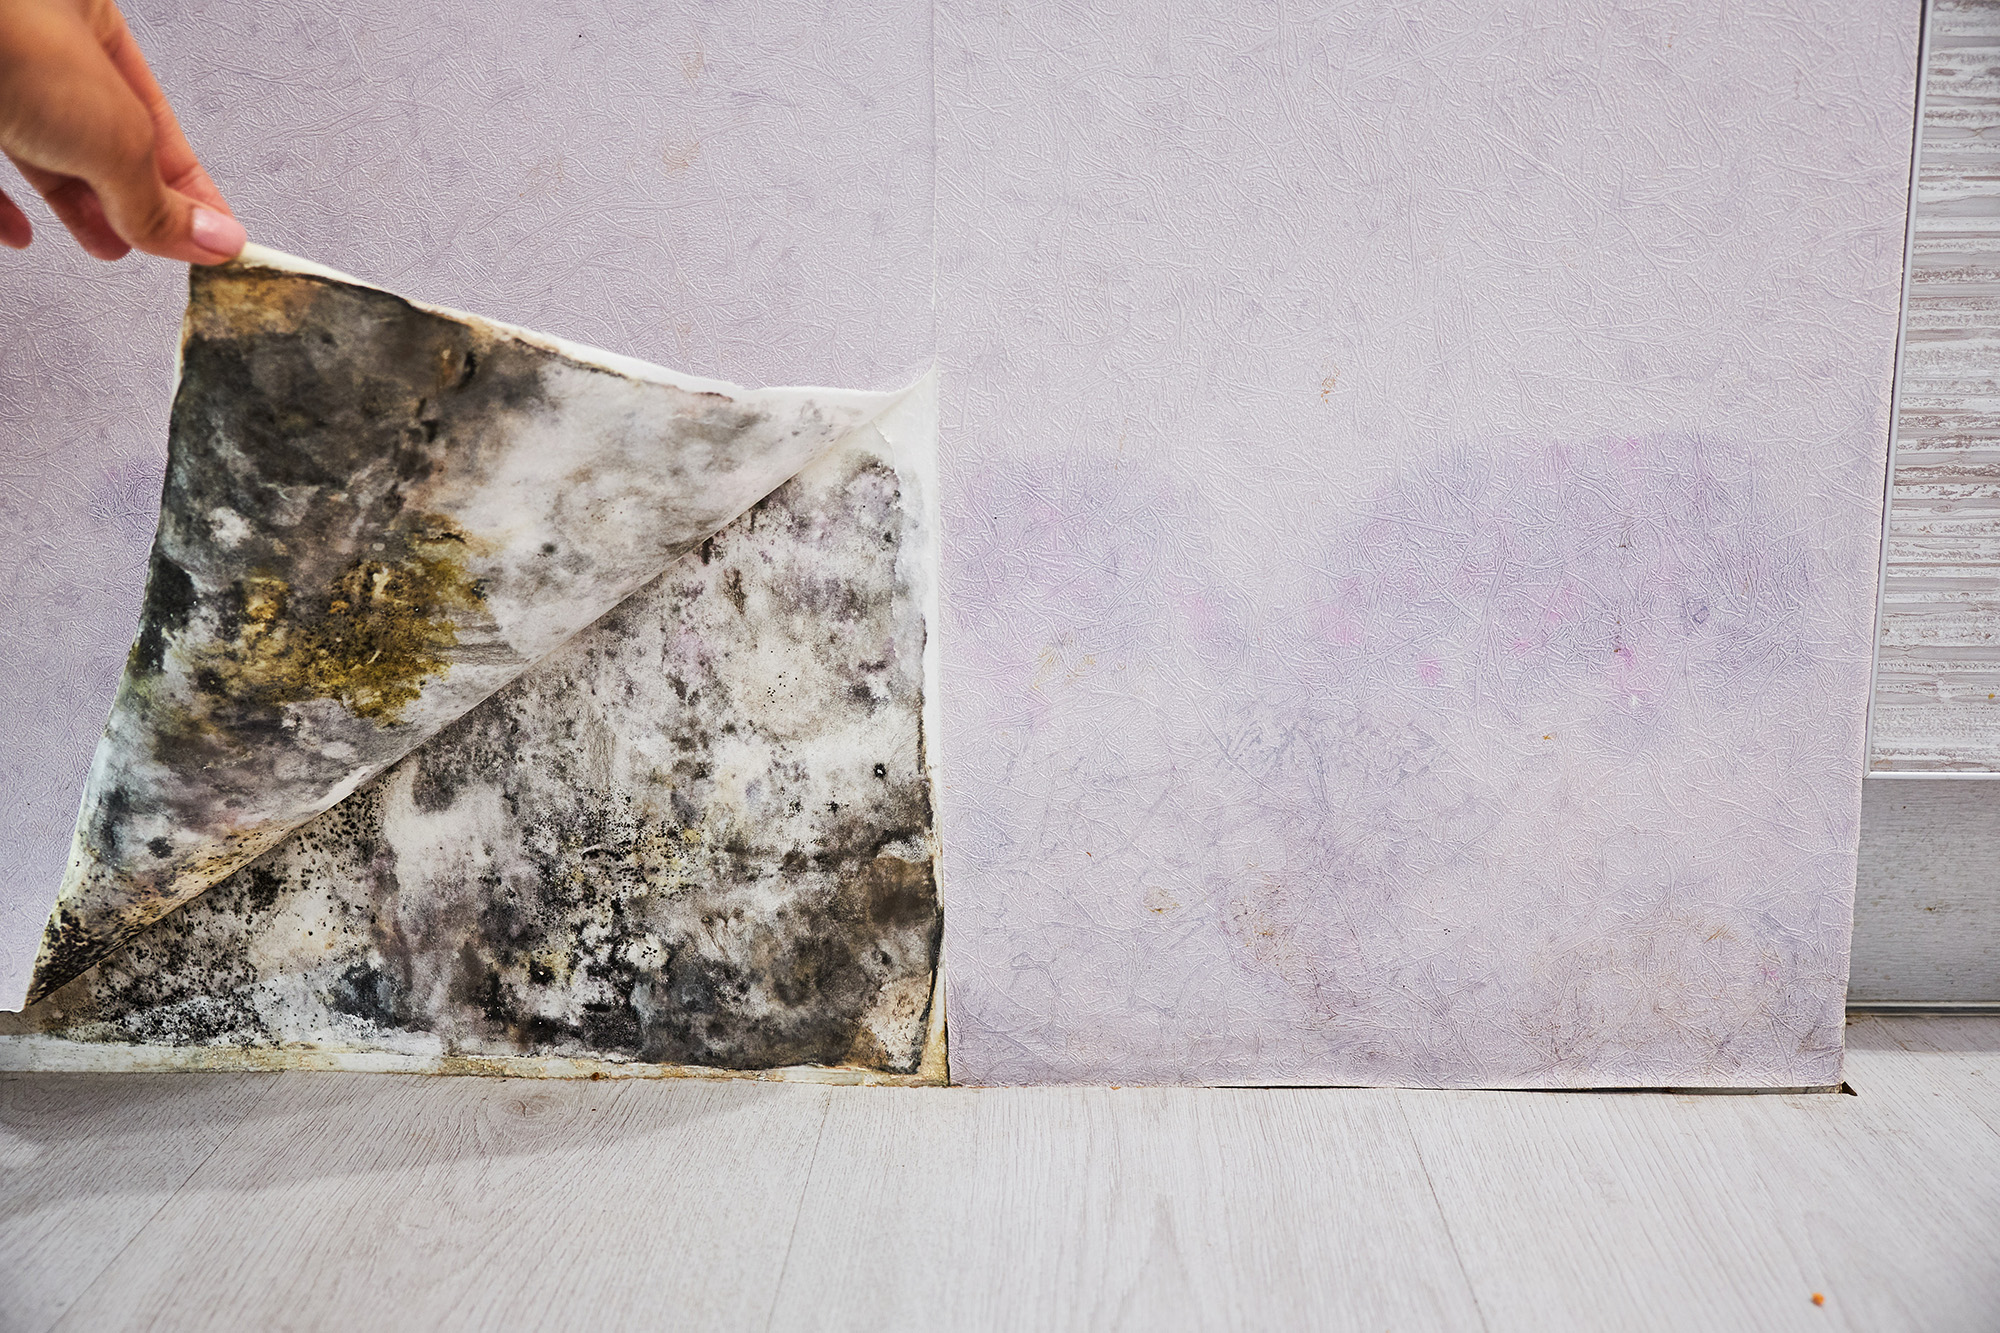 Woman peeling up wallpaper to reveal mold underneath